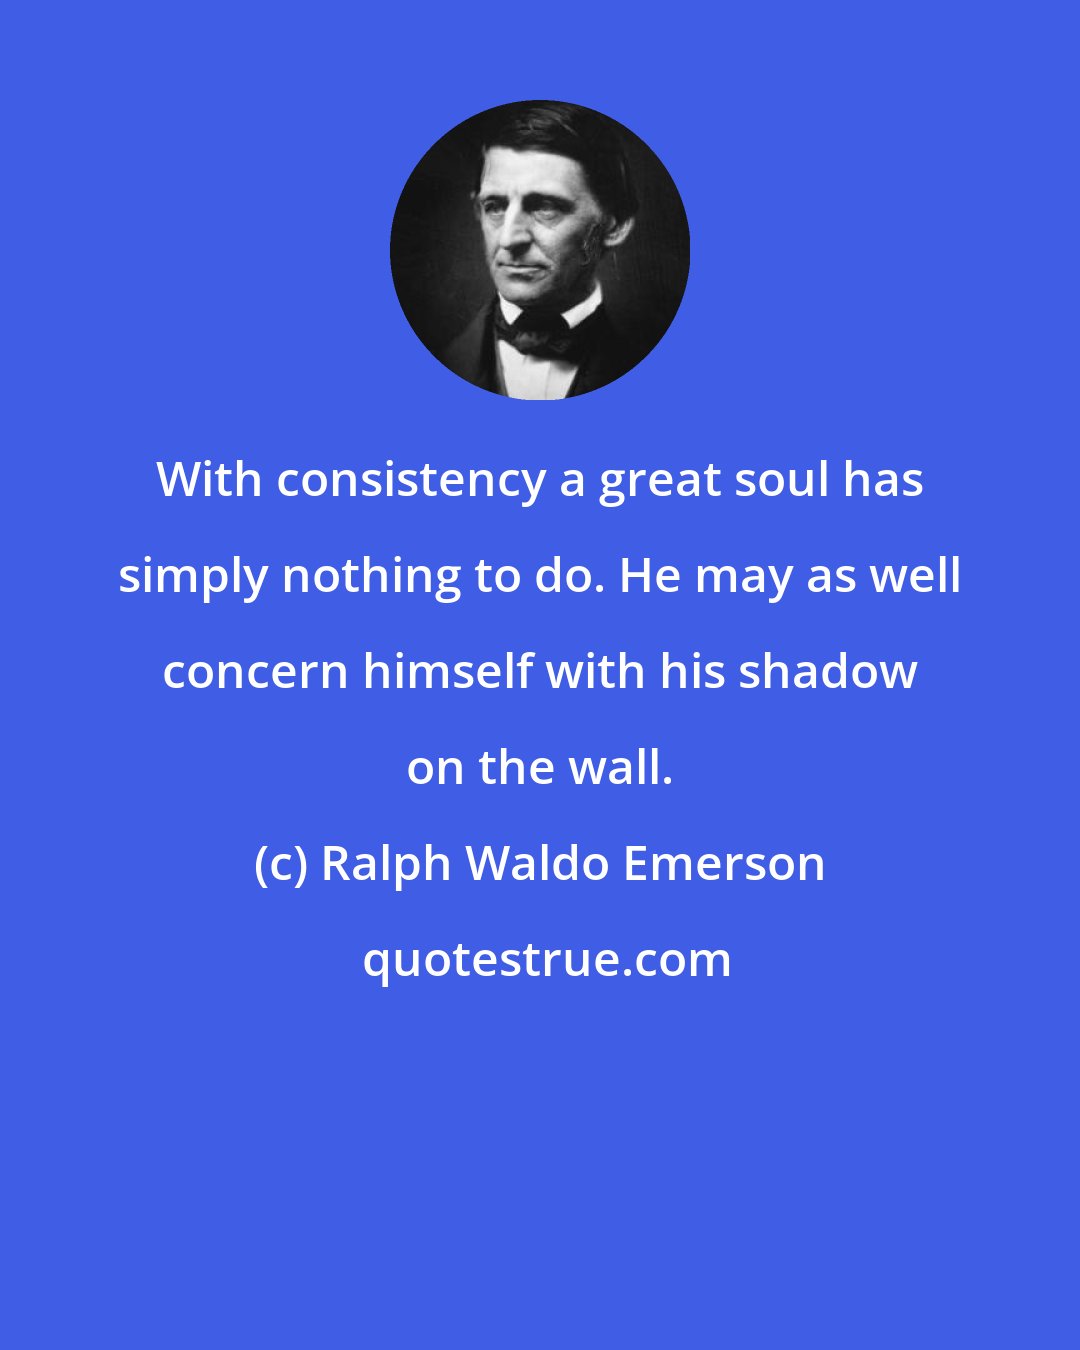 Ralph Waldo Emerson: With consistency a great soul has simply nothing to do. He may as well concern himself with his shadow on the wall.